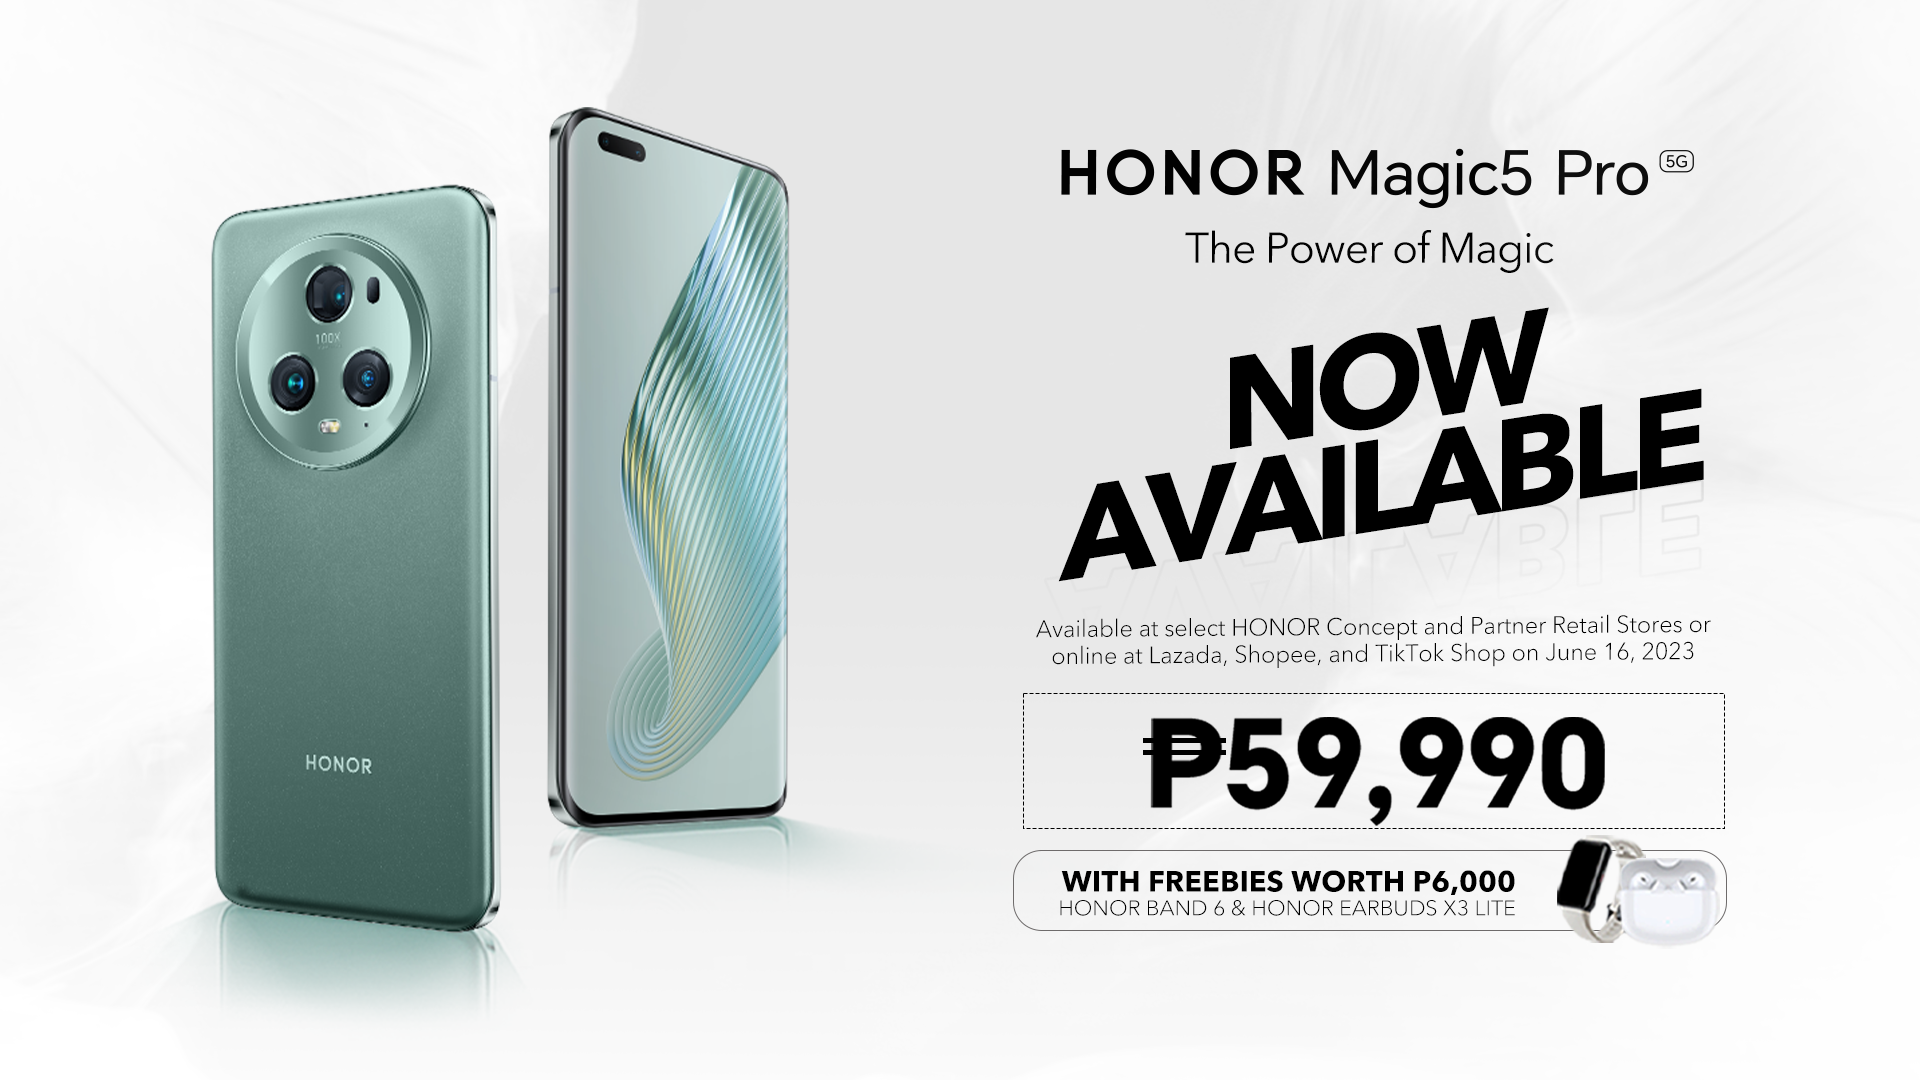 HONOR Magic5 Pro available nationwide on June 16